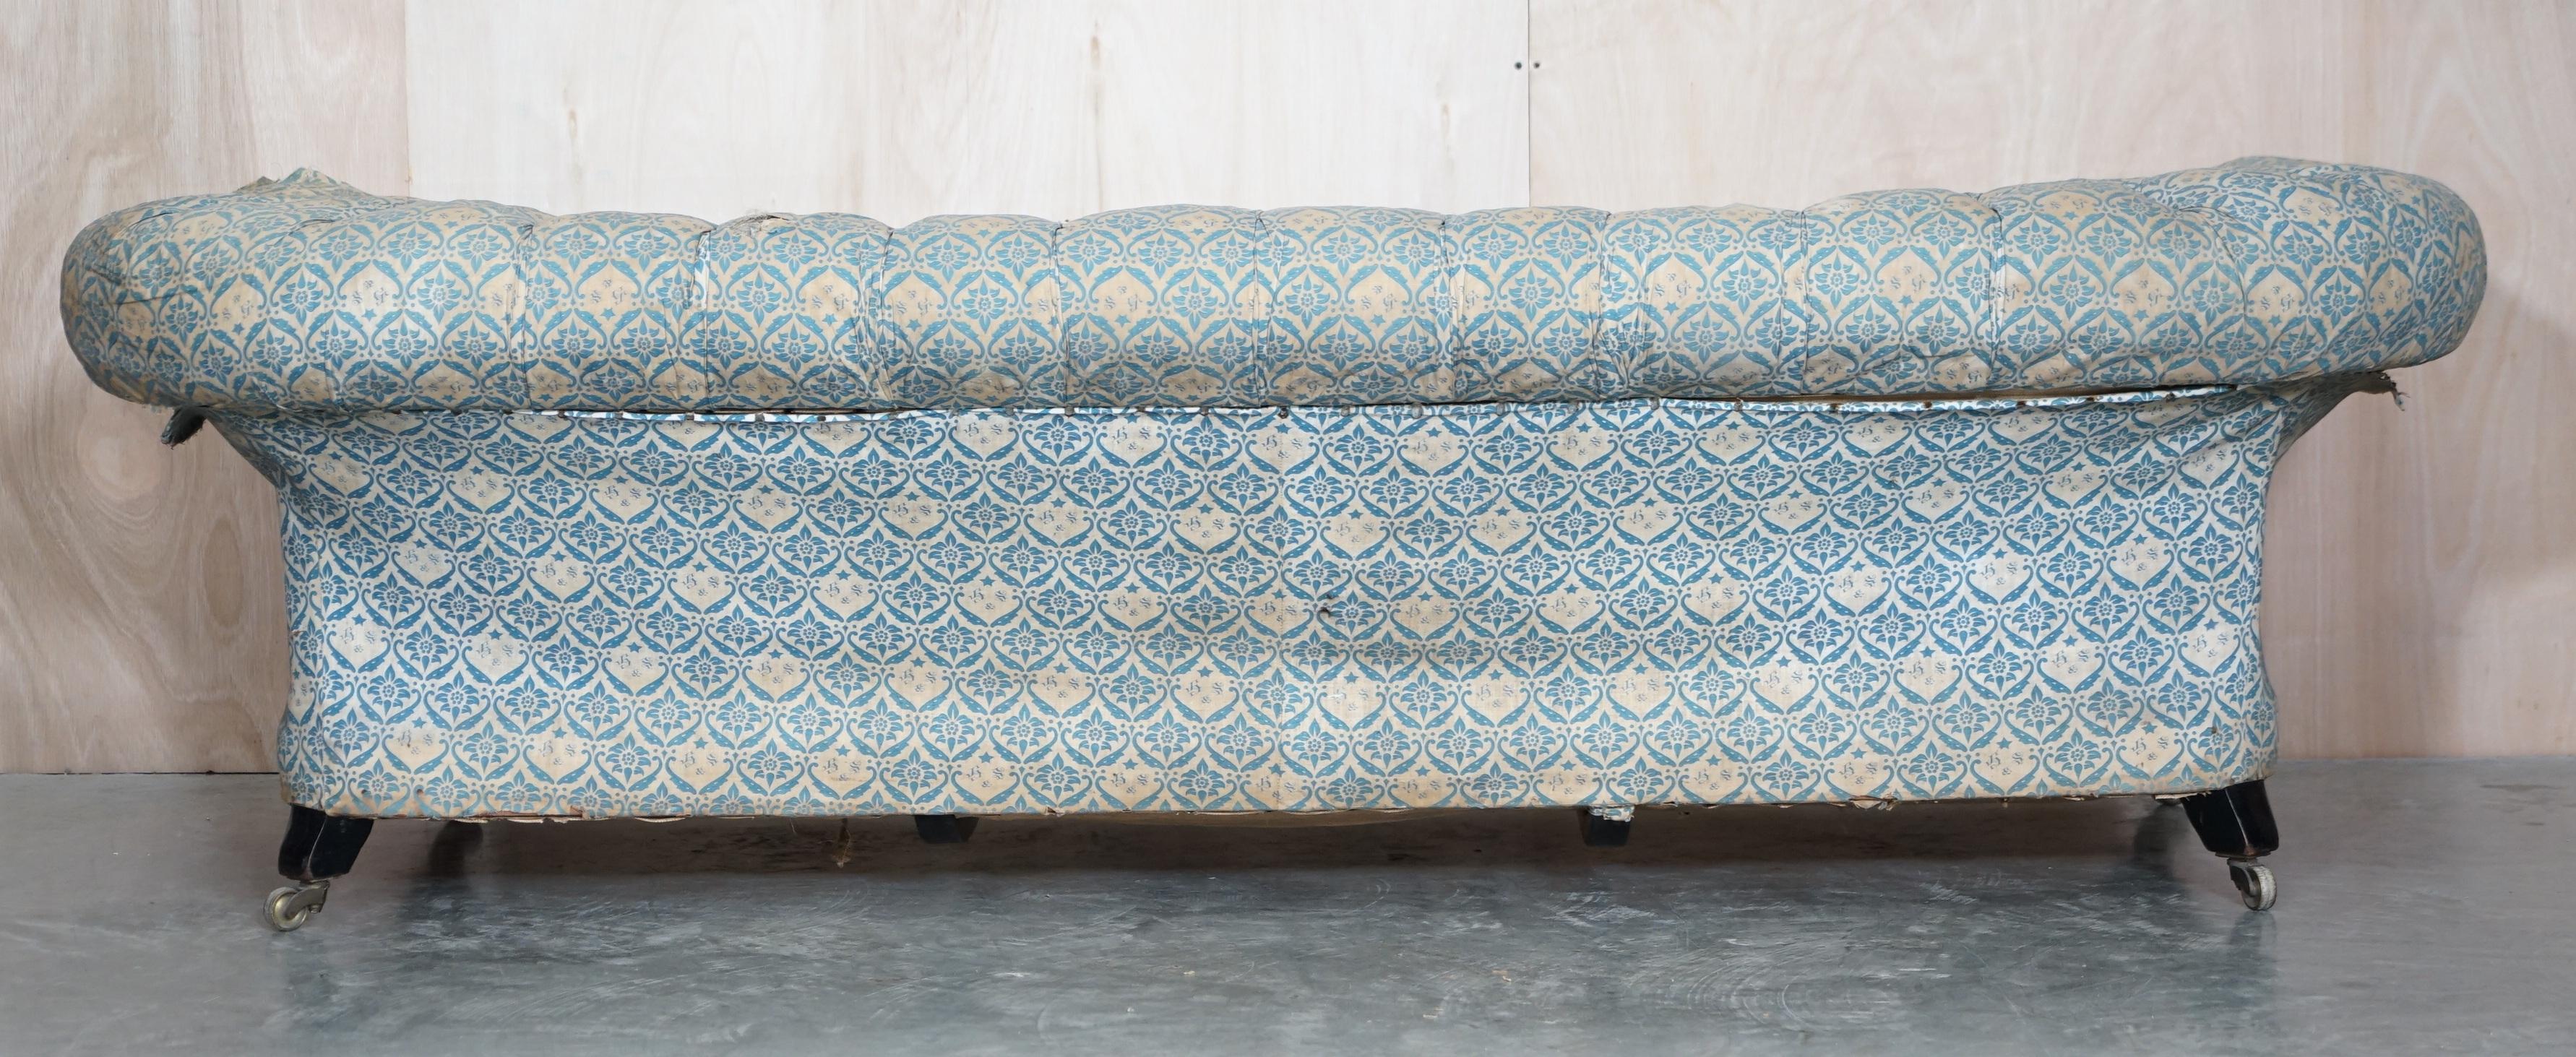 Unrestored Antique Victorian Howard & Son's Chesterfield Sofa Inc Ticking Fabric For Sale 10